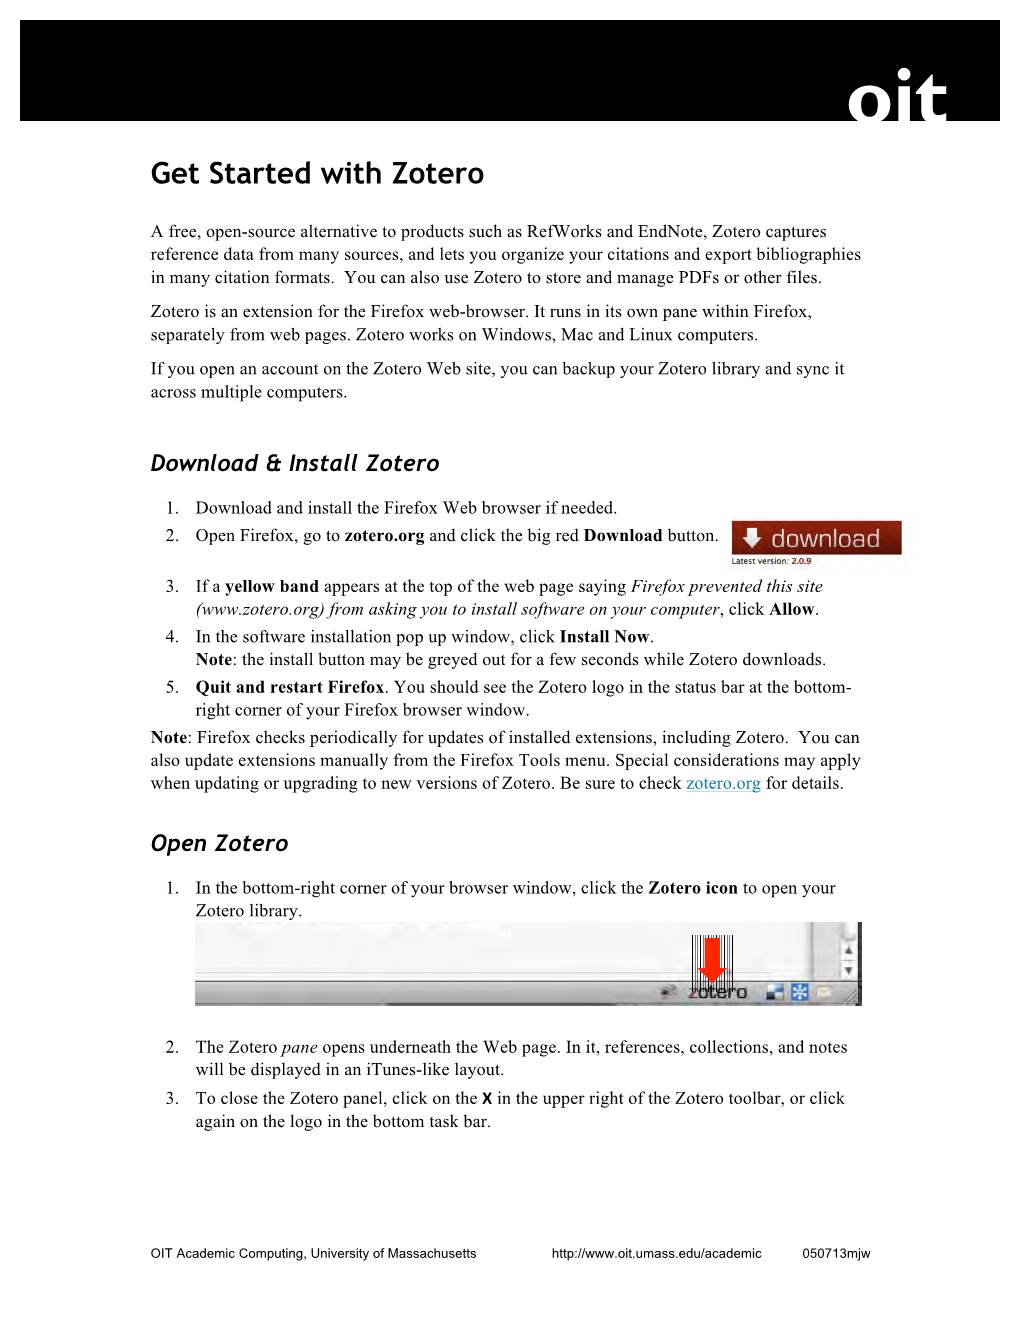 Get Started with Zotero